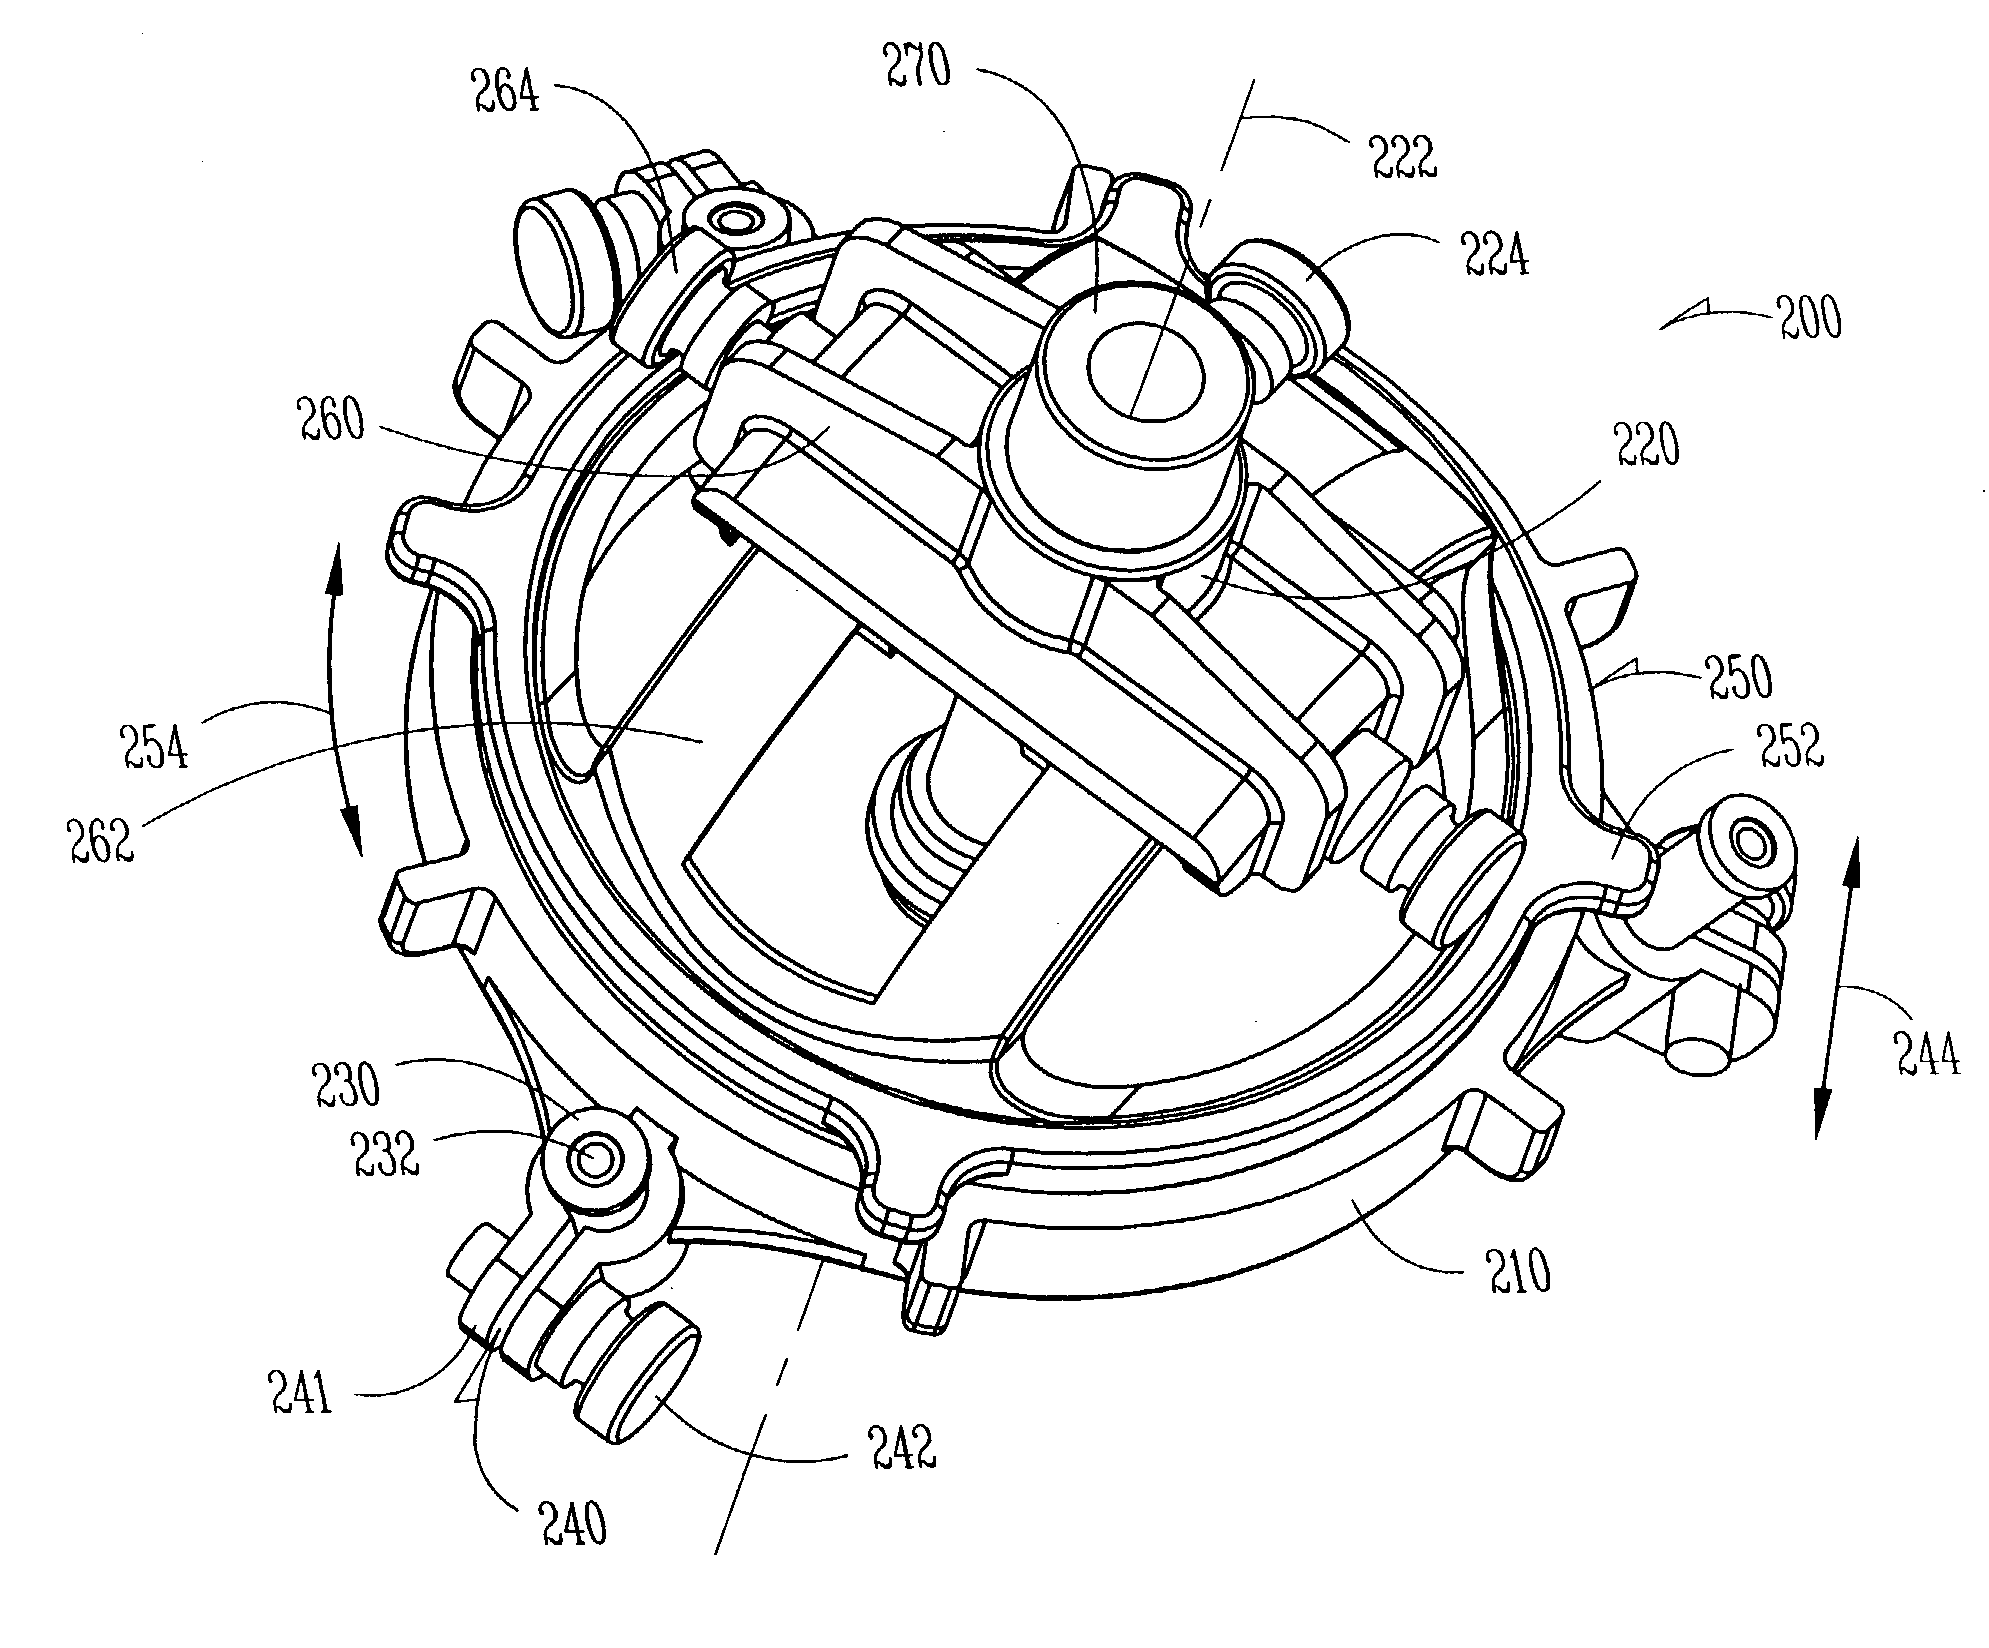 Organ access device and method